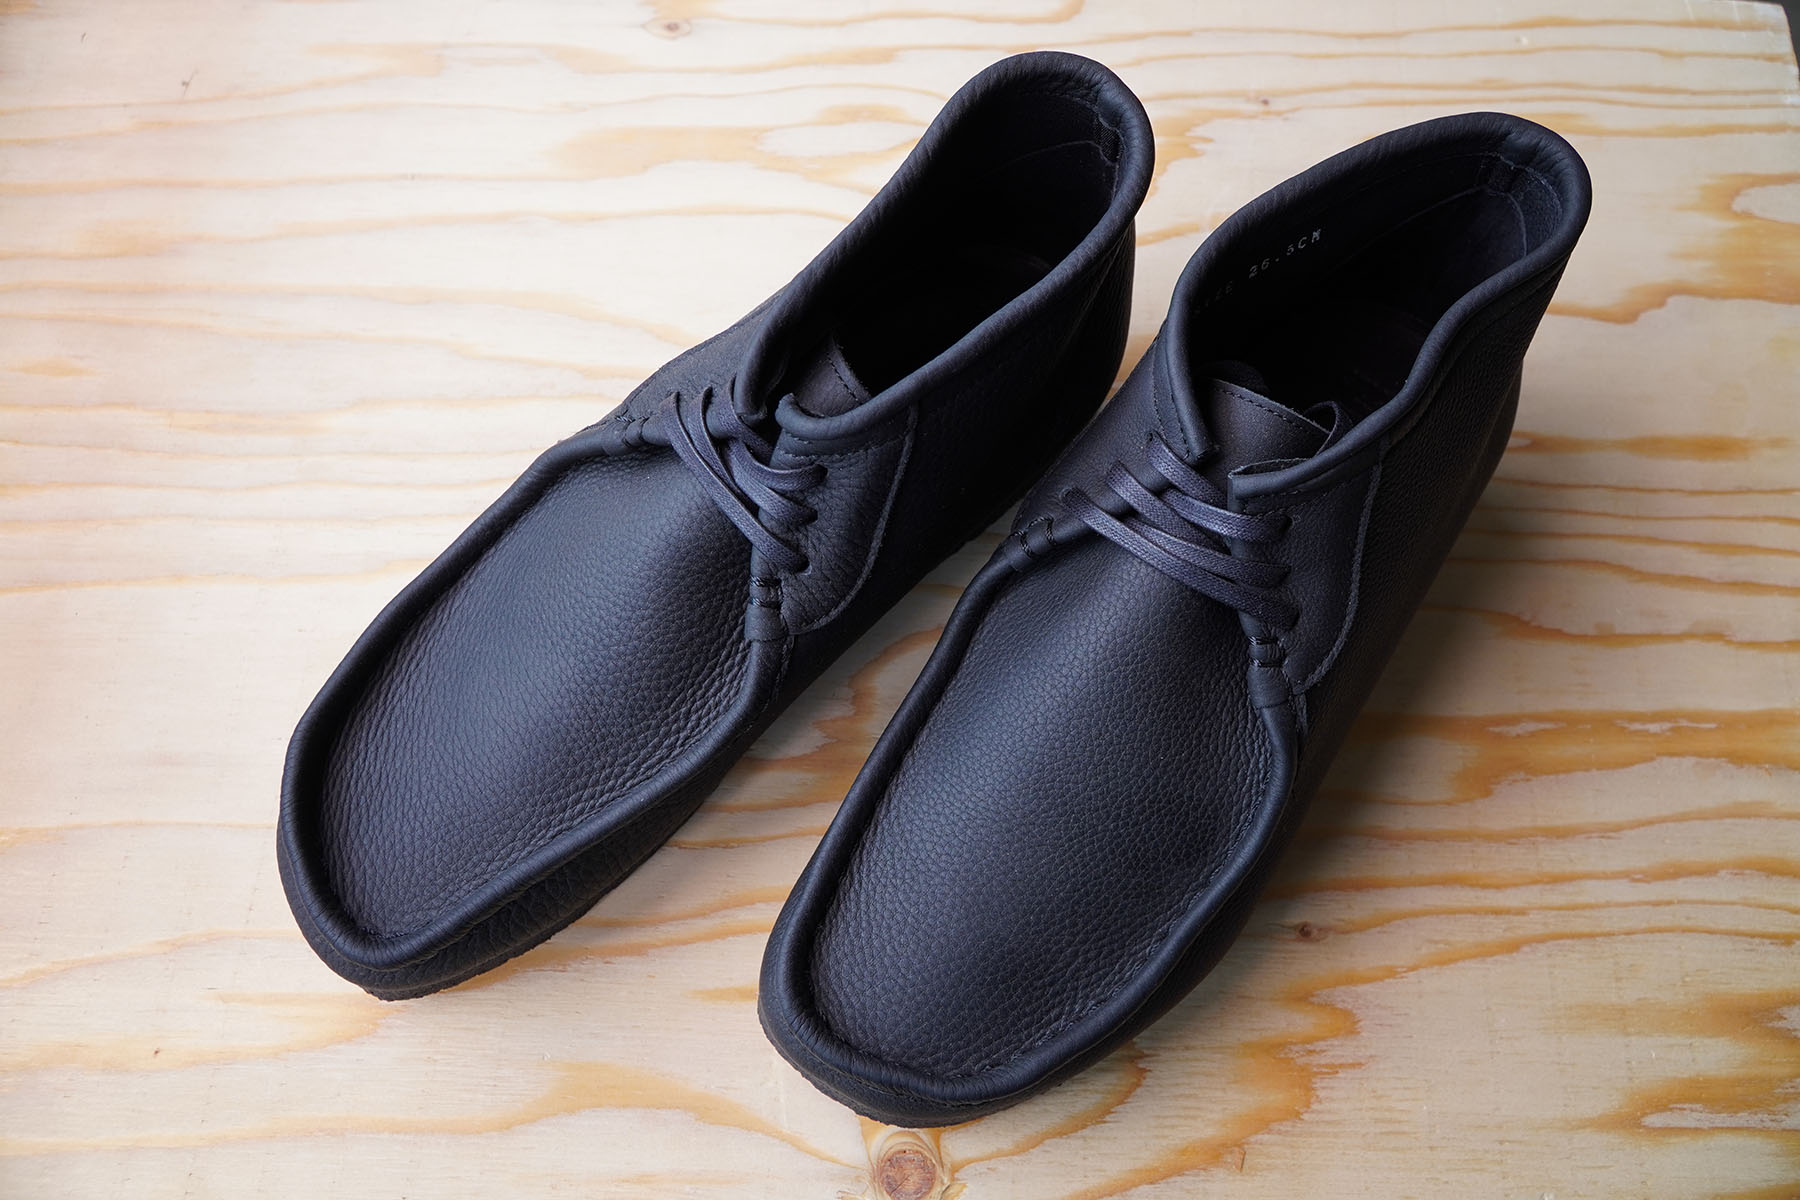 STOCK NO: -exclusive for ERA- MOCCASIN SHOES BLACK